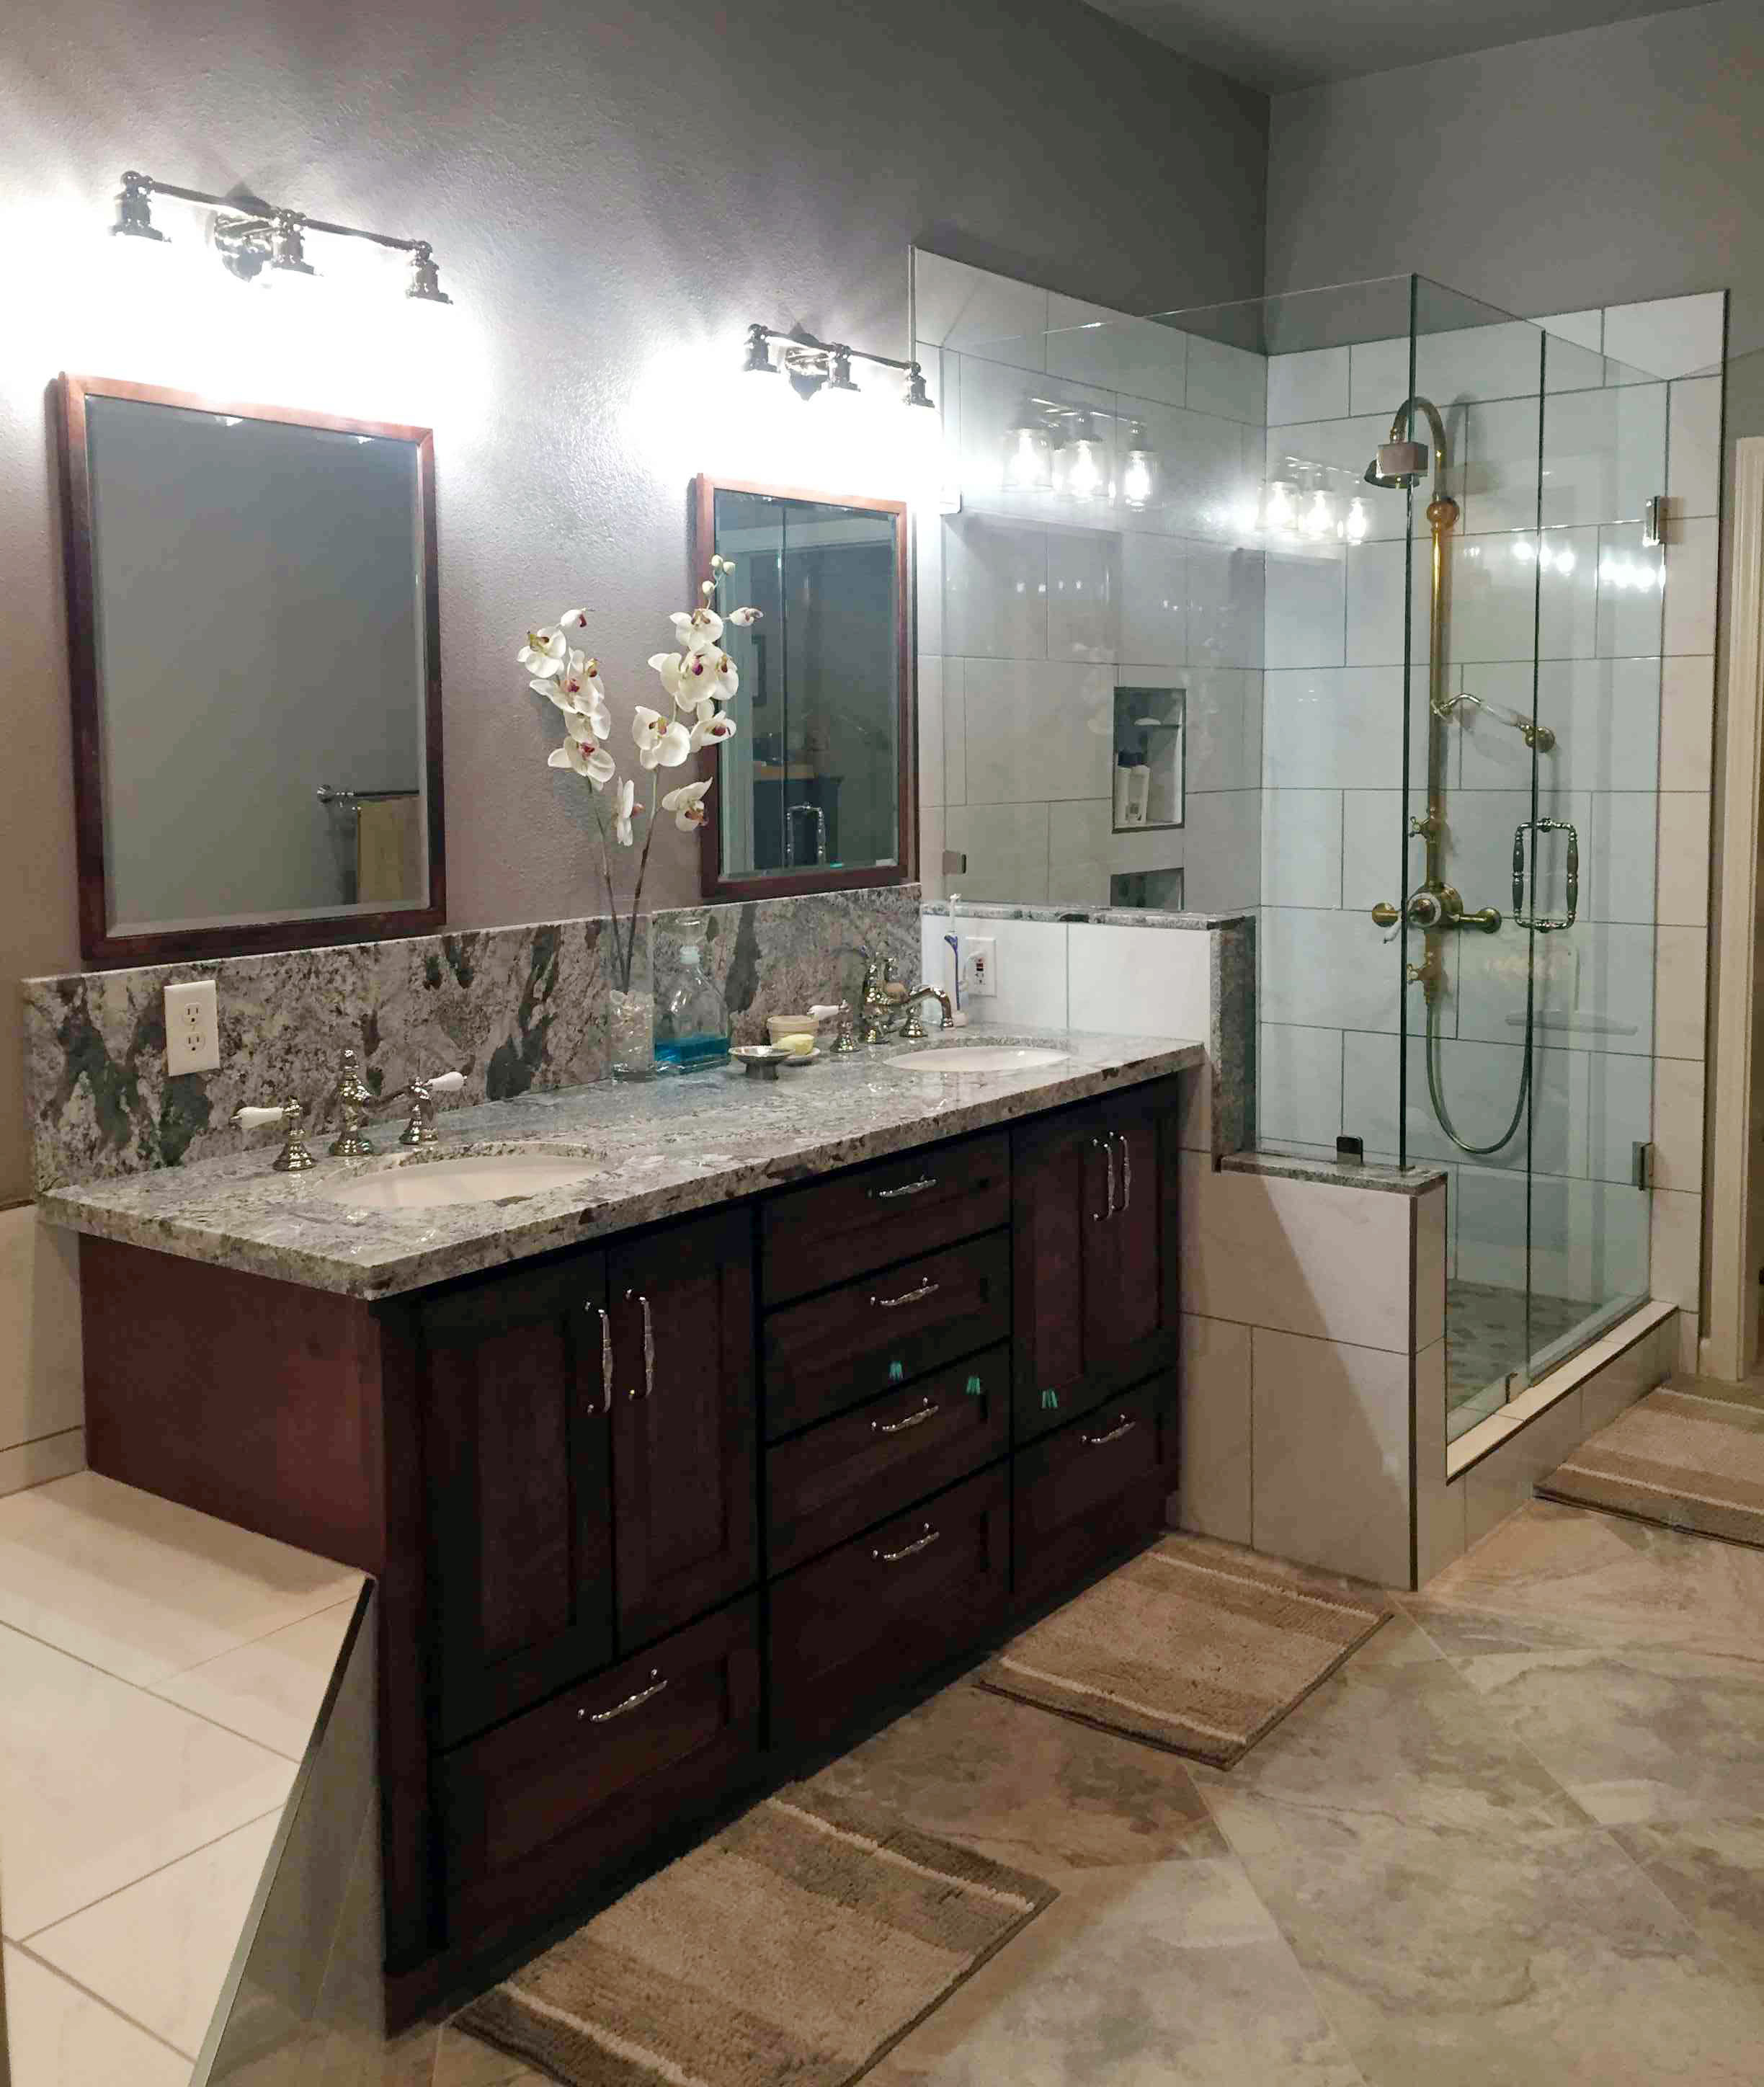 Cosmic lessons in patience: The bathroom remodel edition